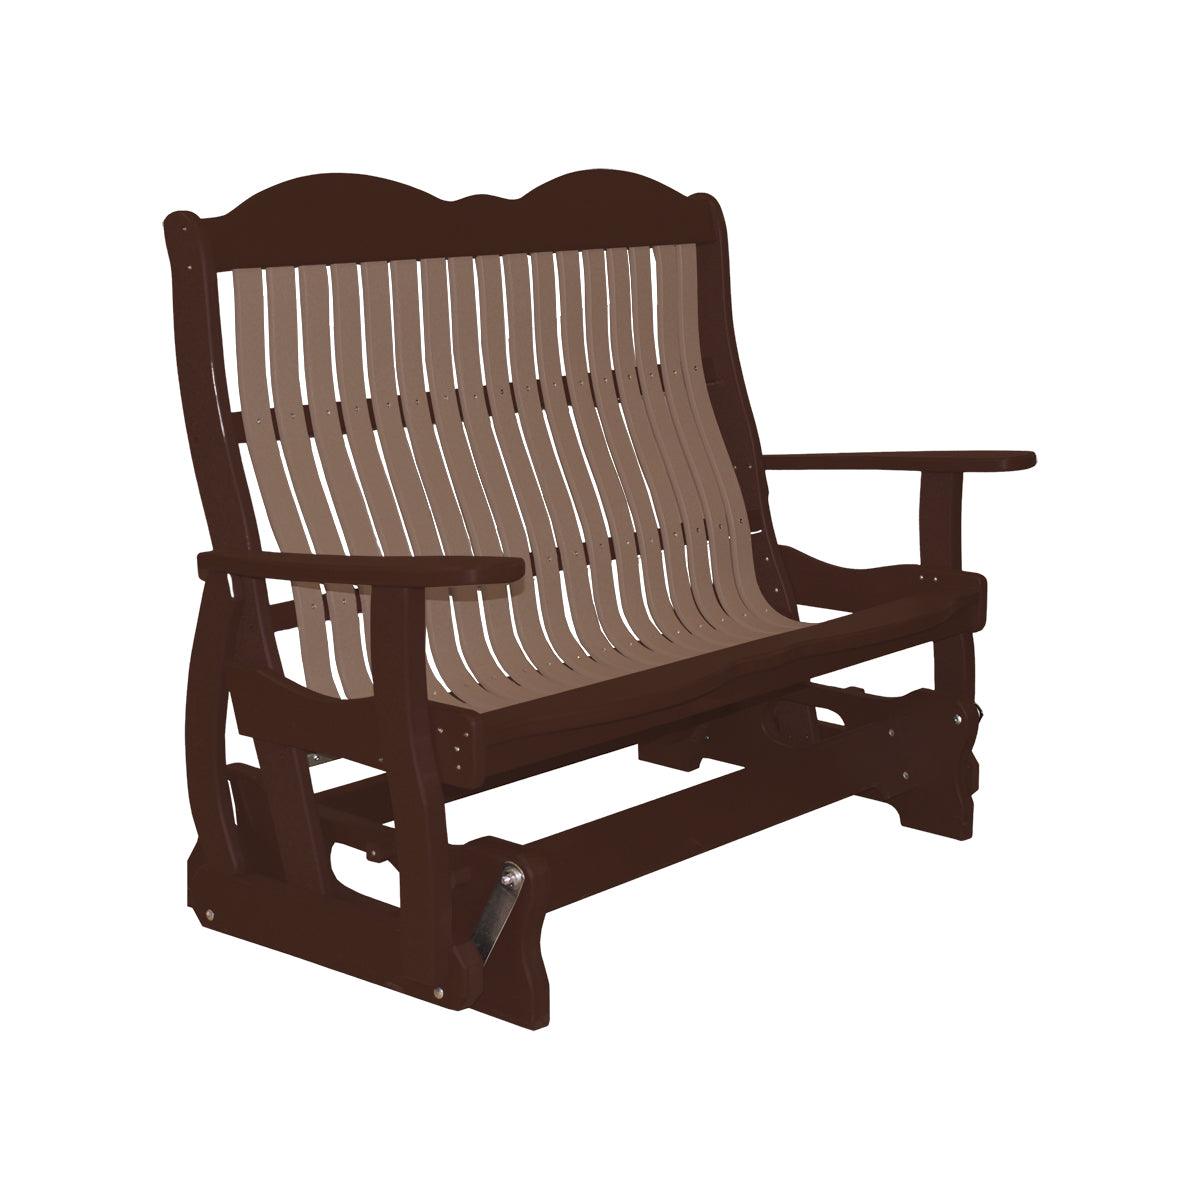 Classic Cottage Glider Bench